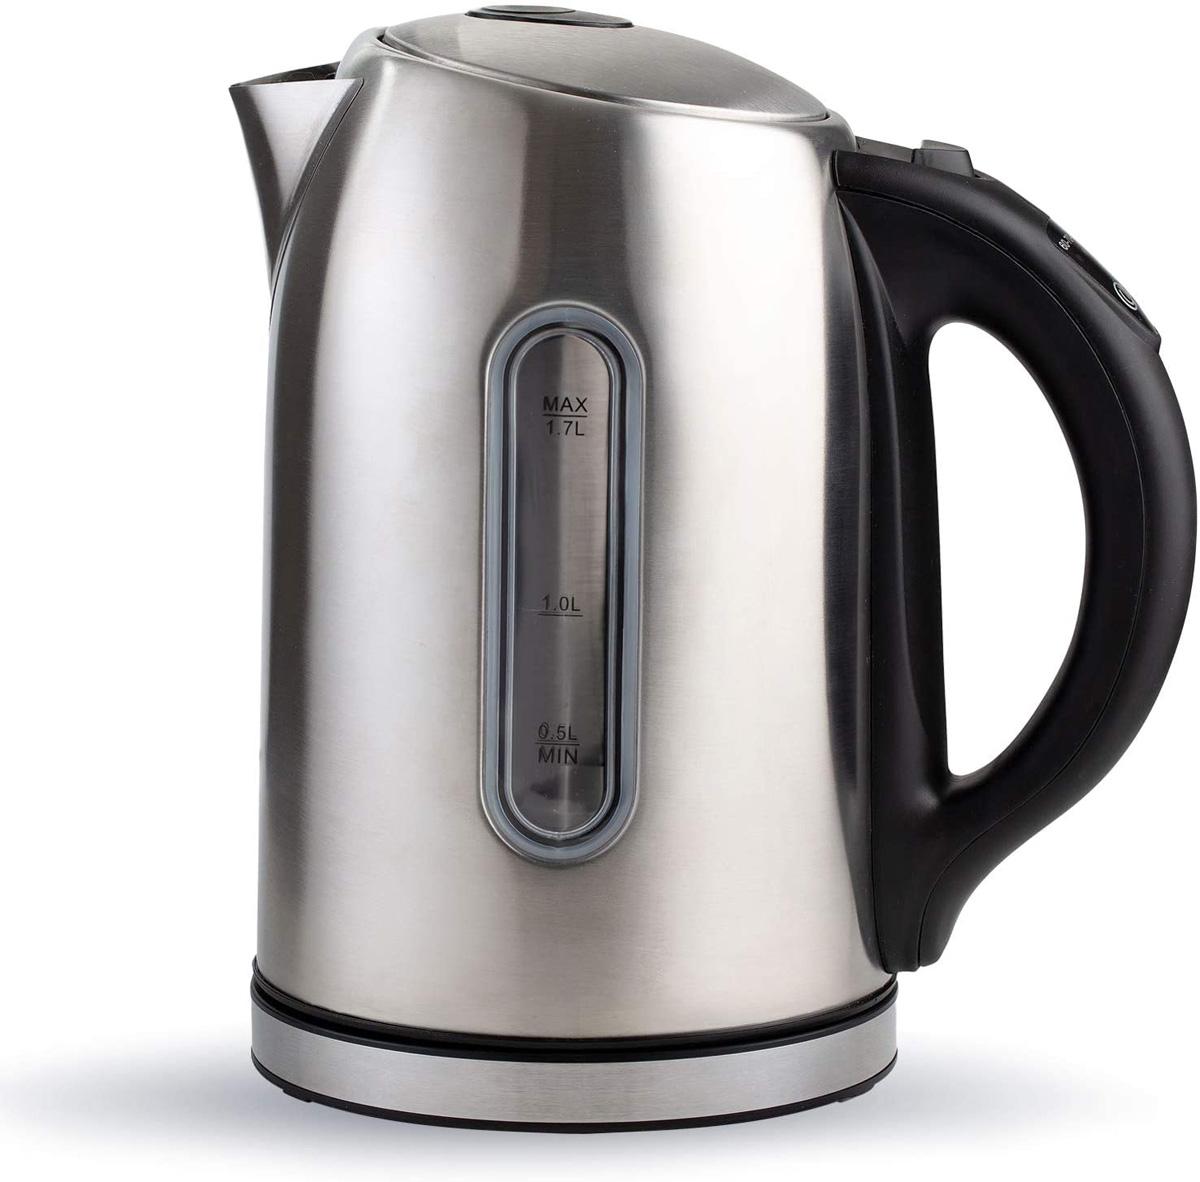 Chefs Star Electric Tea Kettle for $15.99